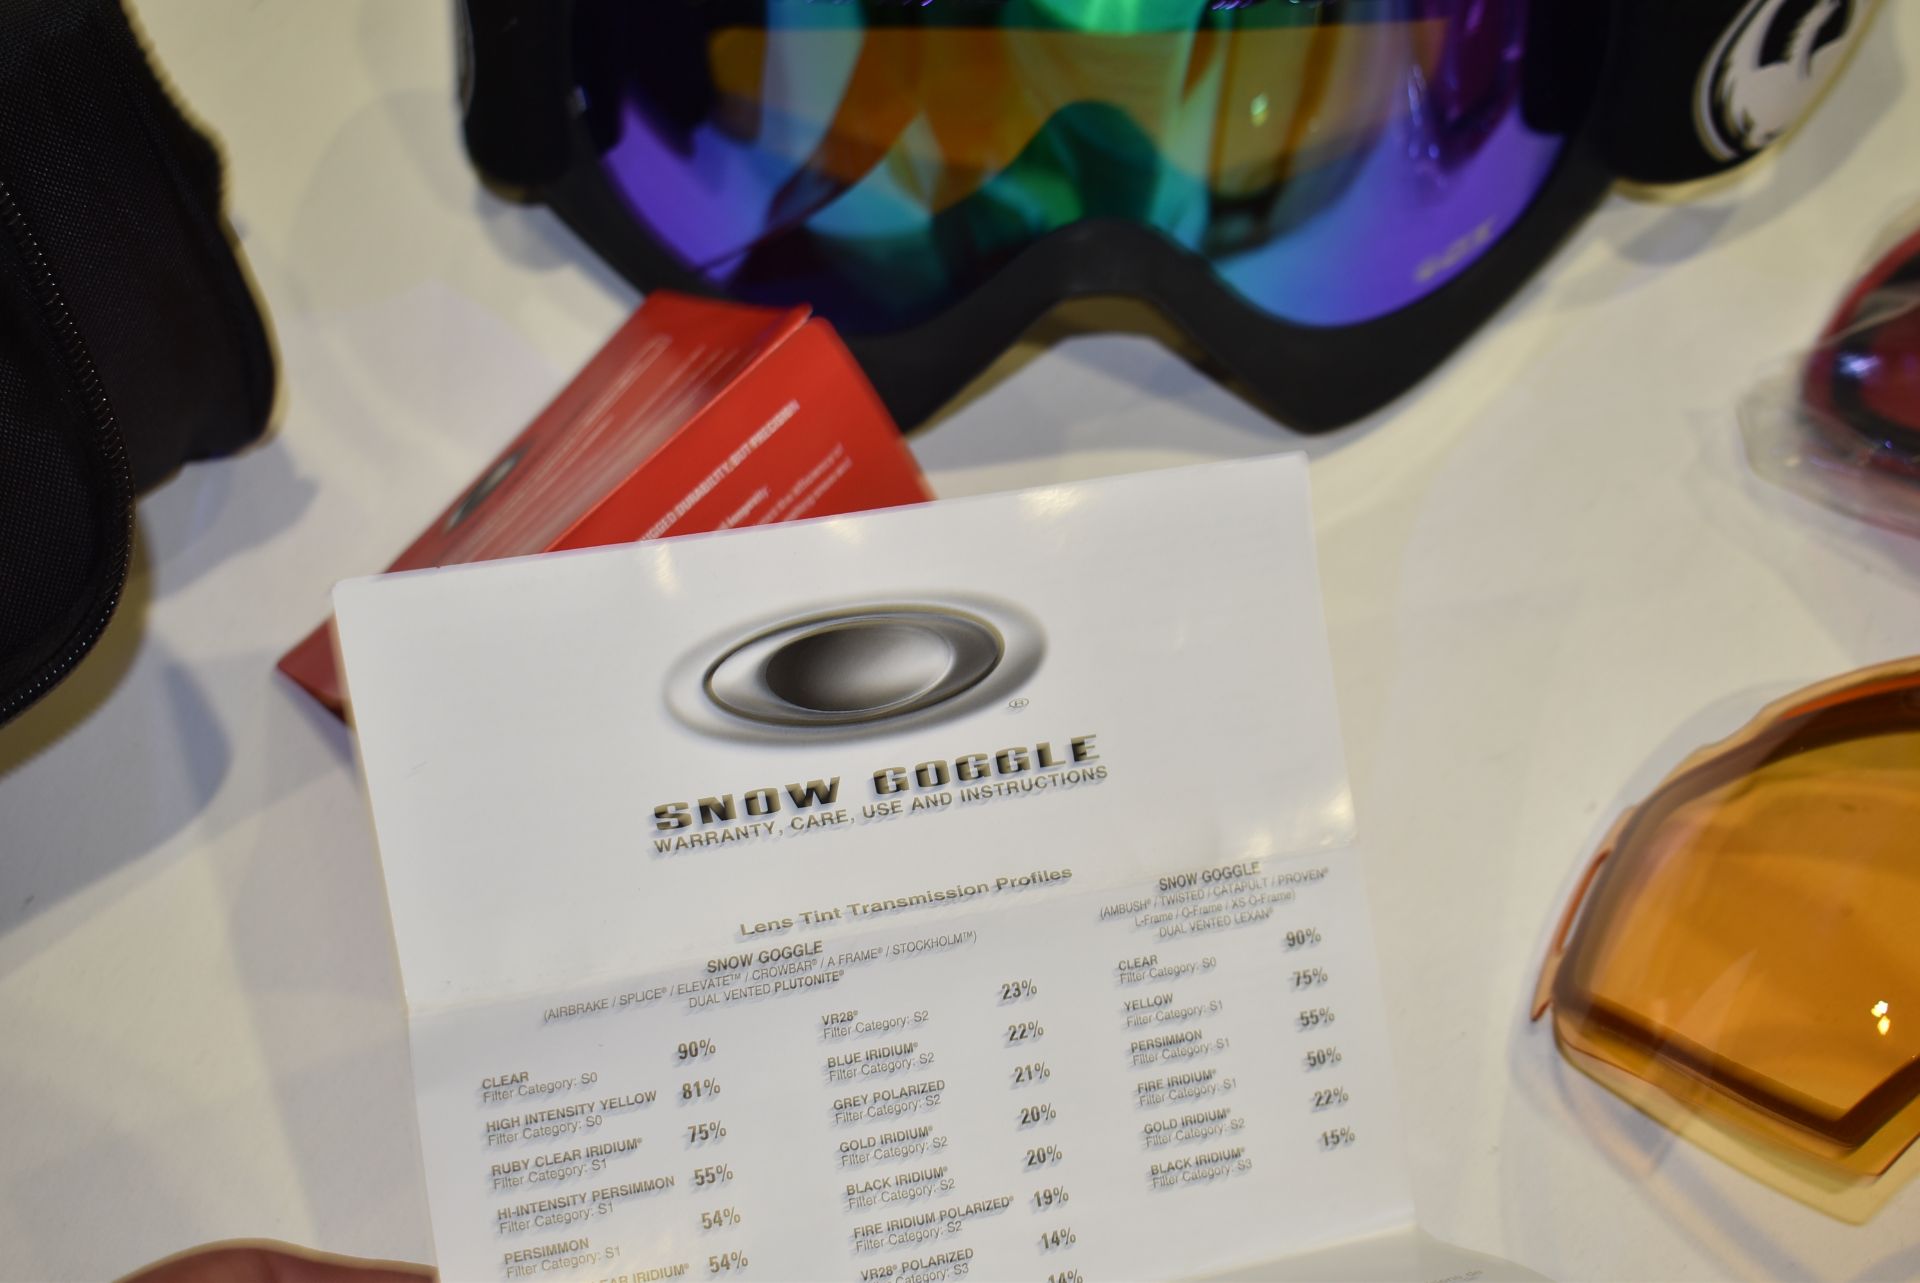 1 x Pair of Oakely Snow Goggles With Interchangeable Lenses and Carry Case - CL431 - Ref CB142 - - Image 4 of 8